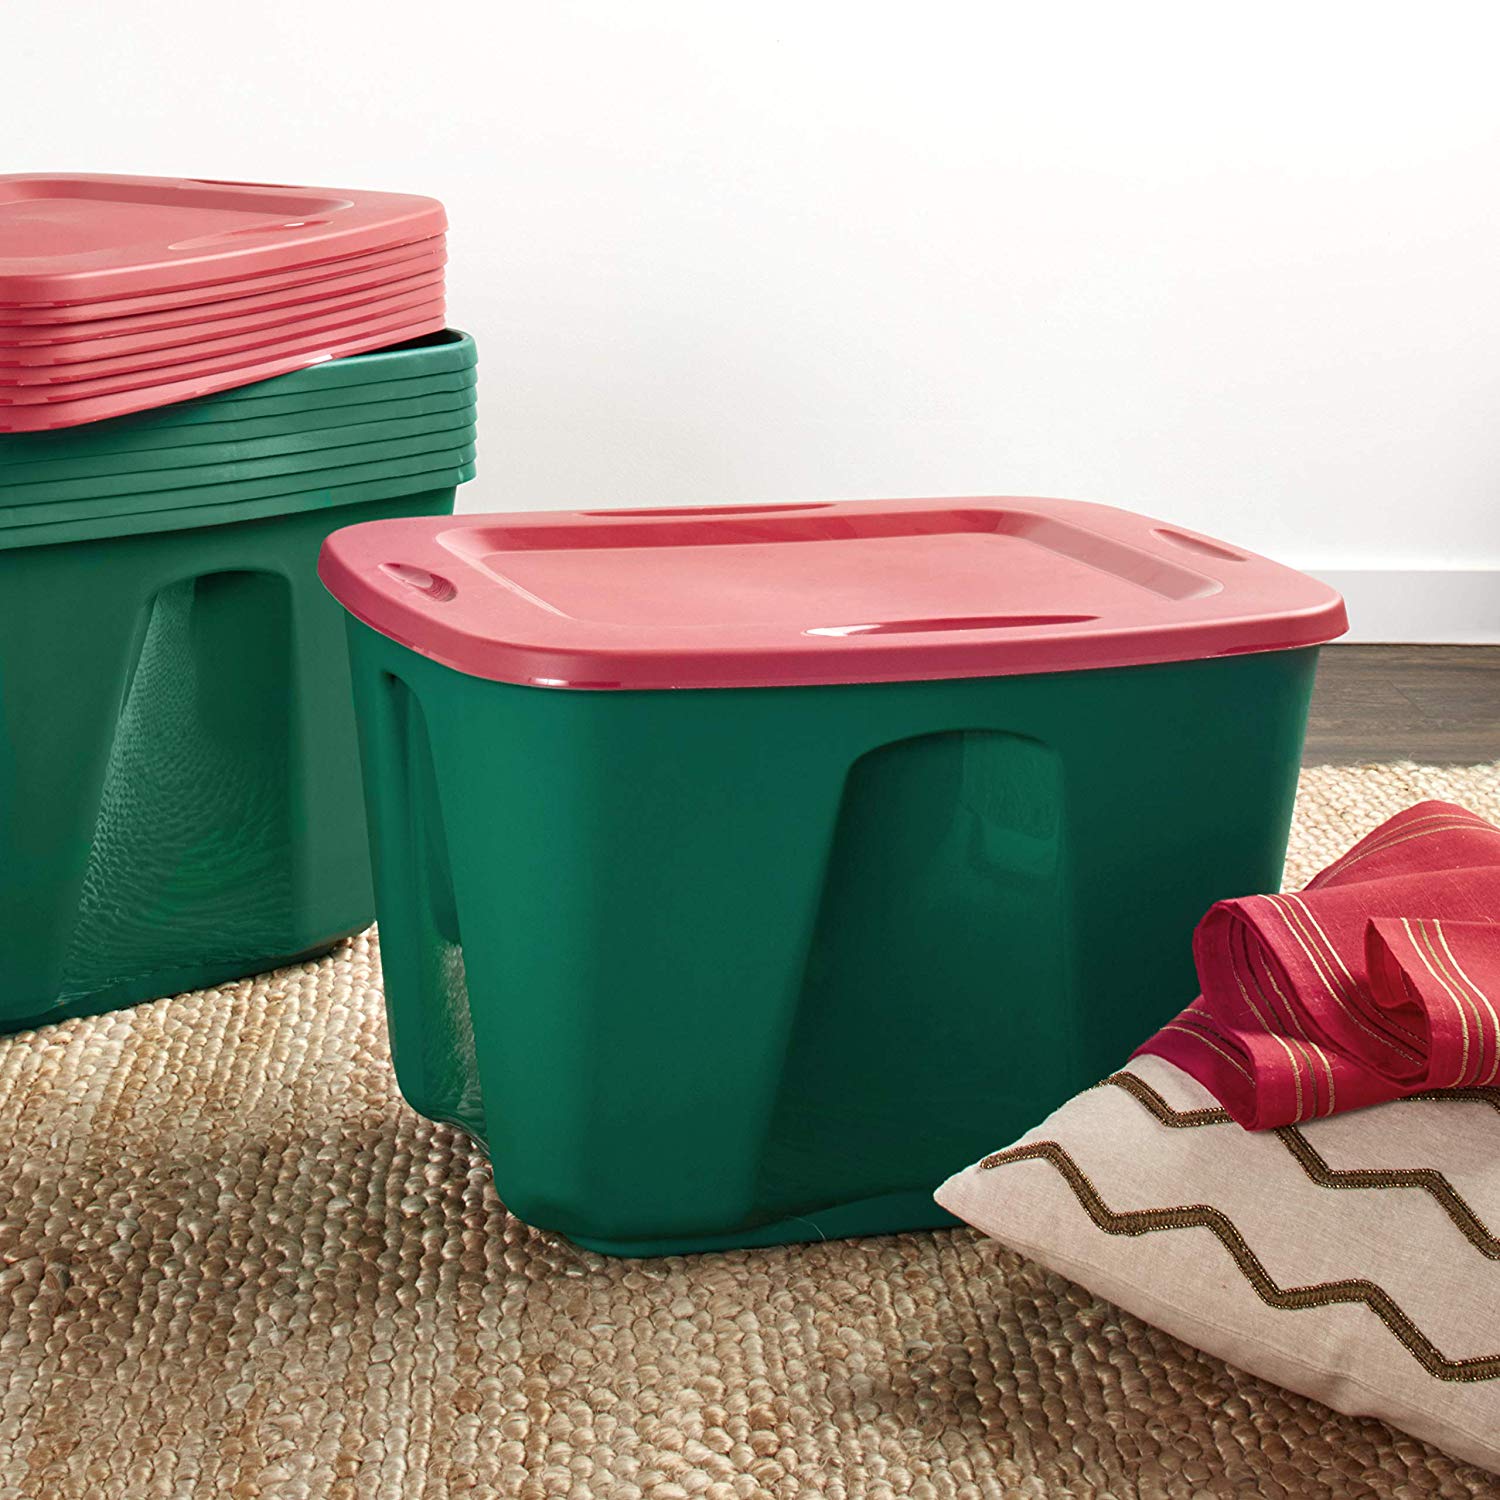 Holiday Living Large 32-Gallons (128-Quart) Red/Green Heavy Duty Tote with  Standard Snap Lid at